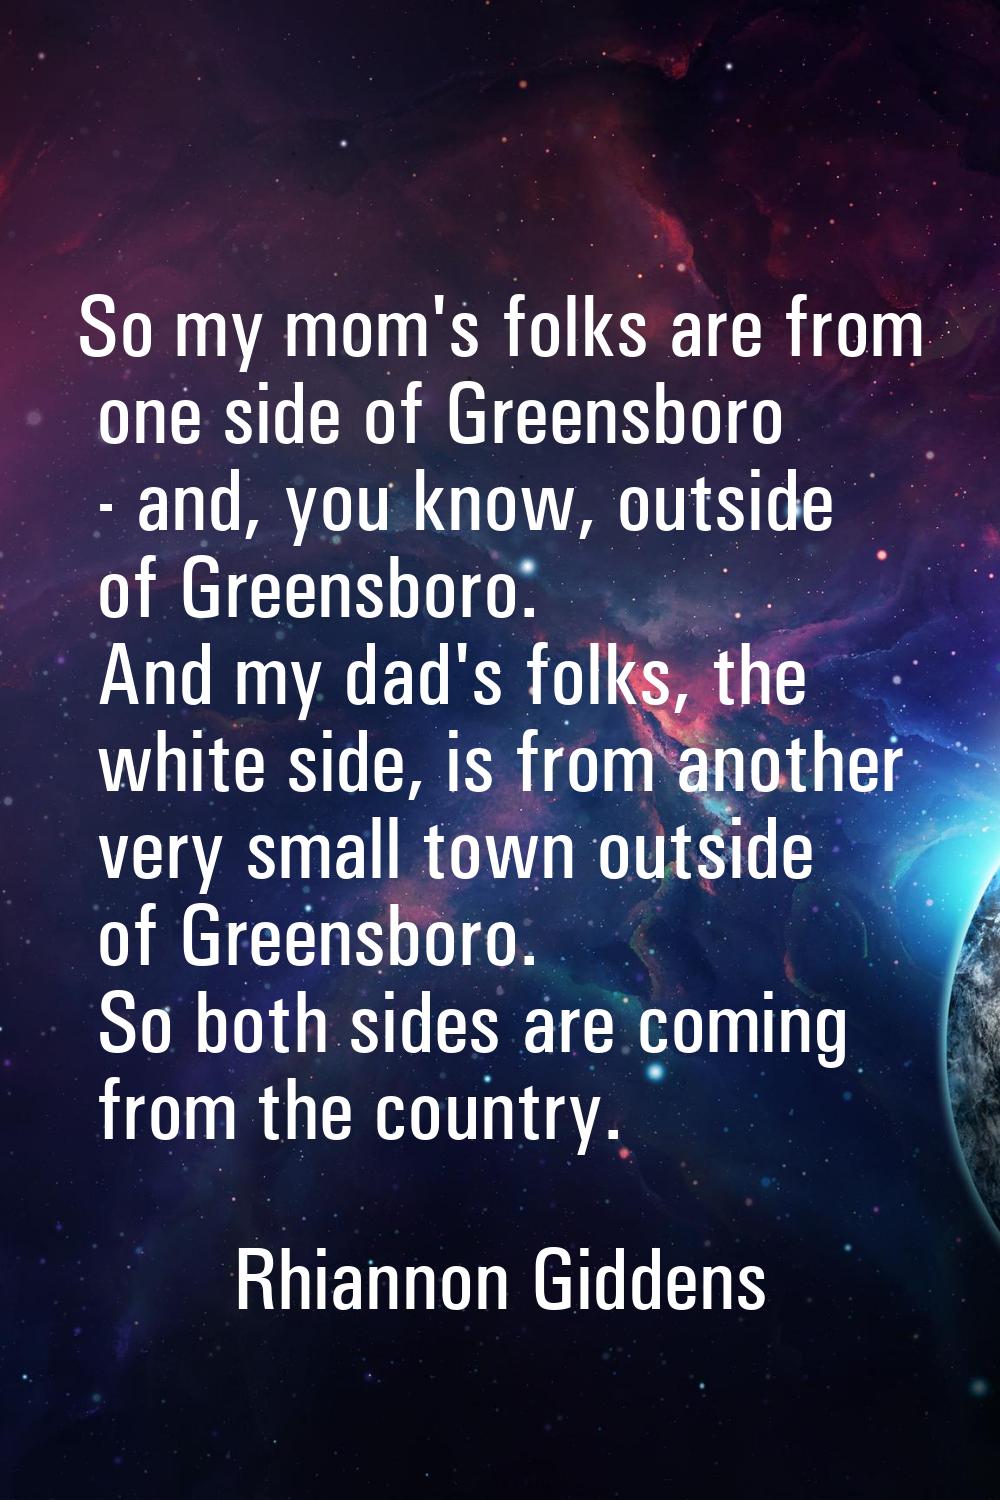 So my mom's folks are from one side of Greensboro - and, you know, outside of Greensboro. And my da